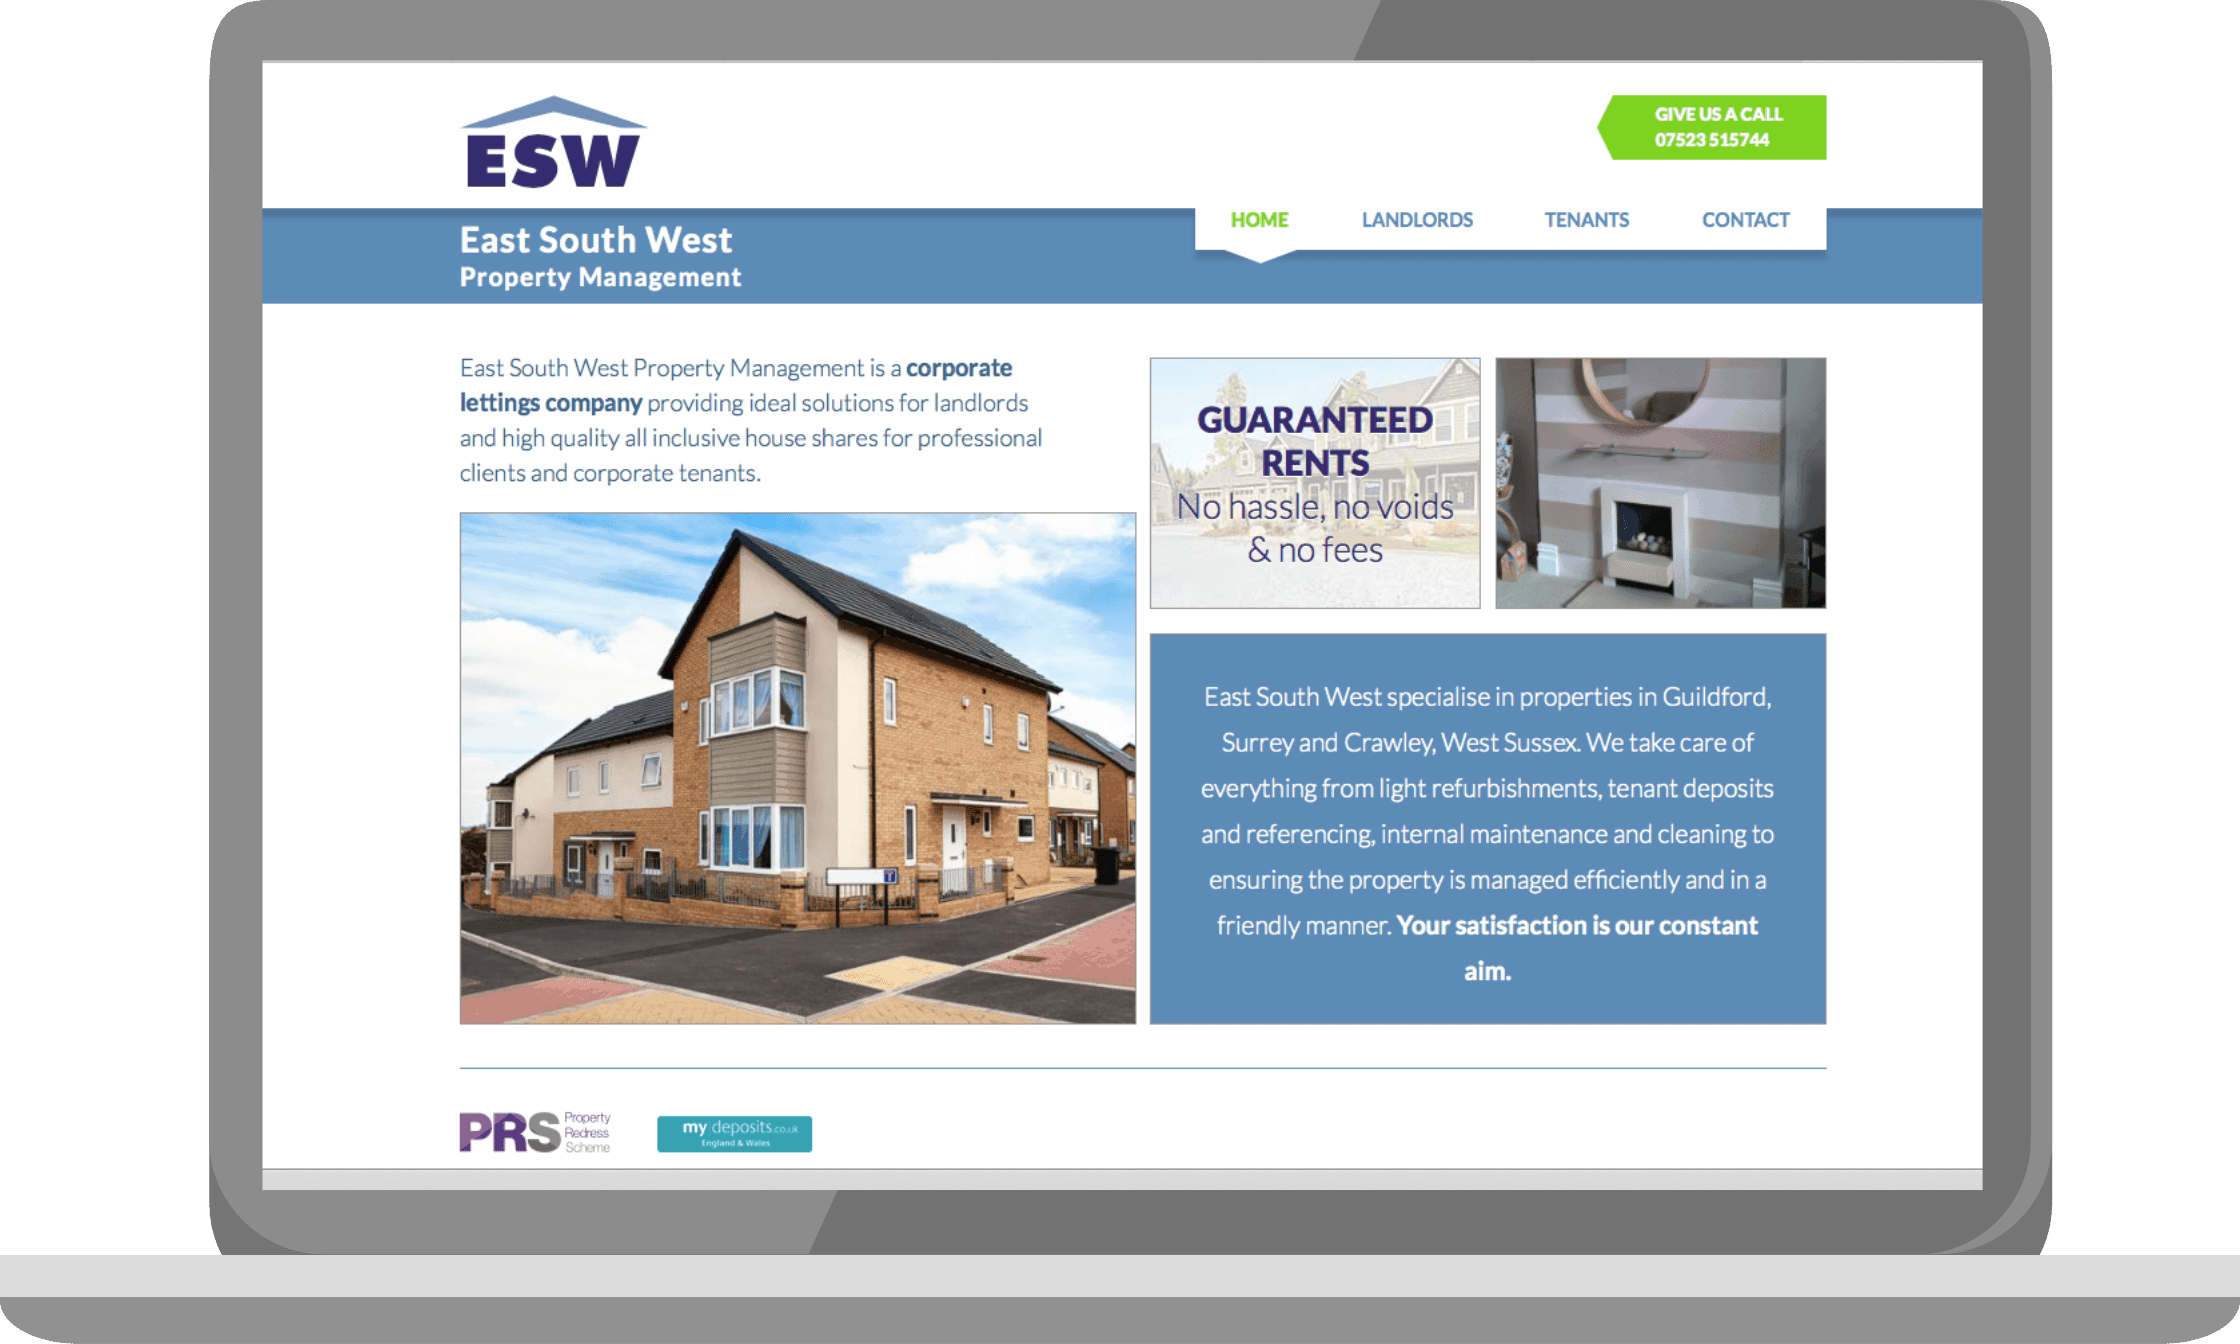 East South West Property management viewed on a laptop